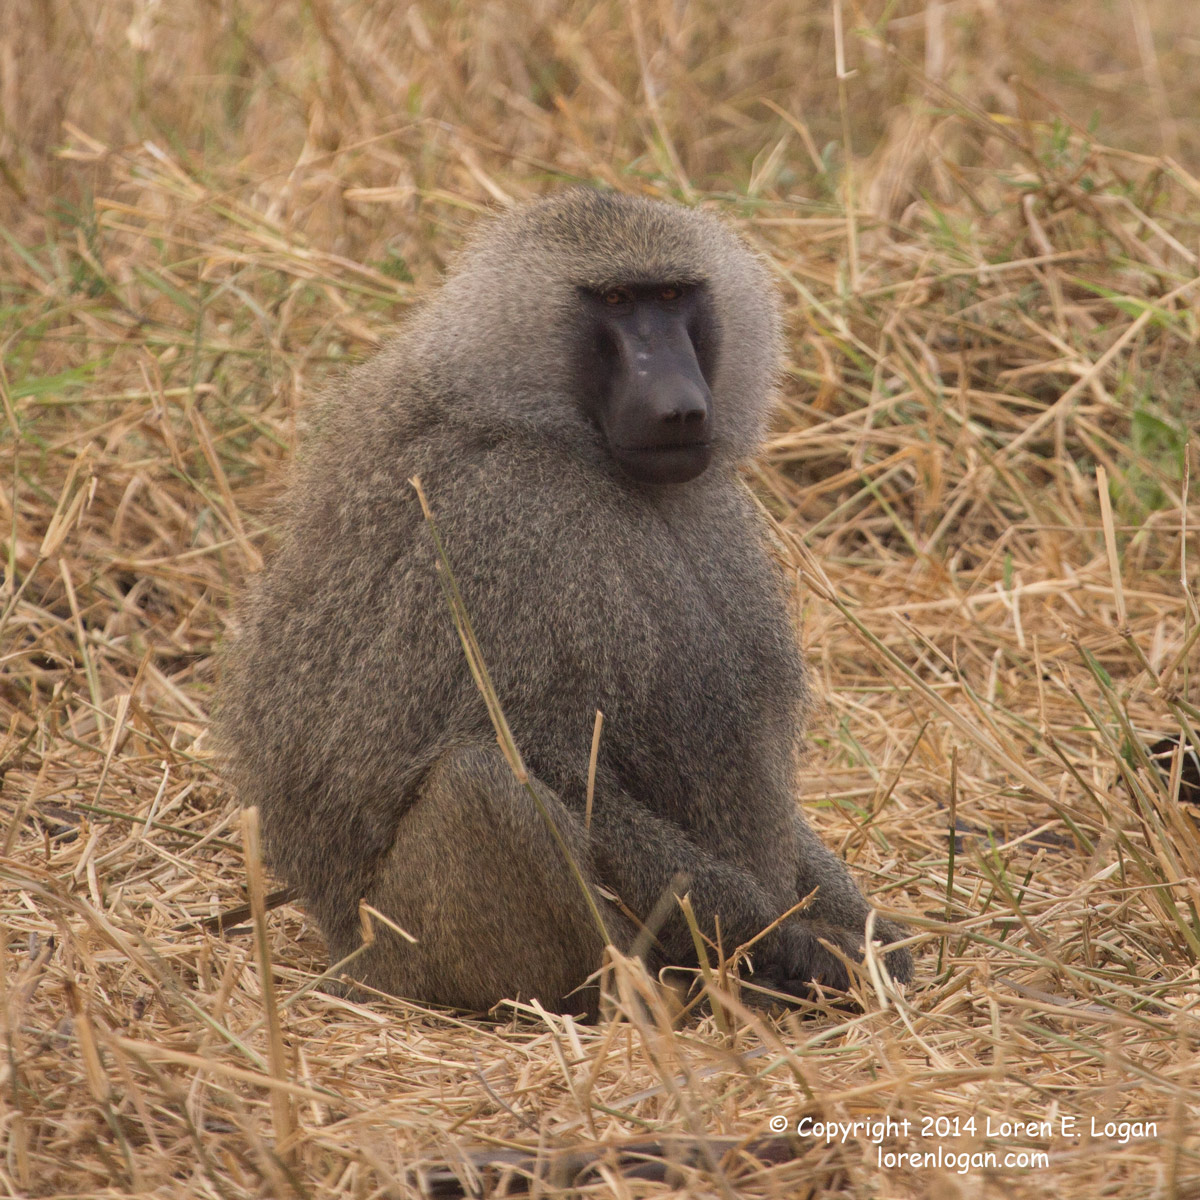 This baboon's fluffy fur seems soft against the dry, harsh grass.